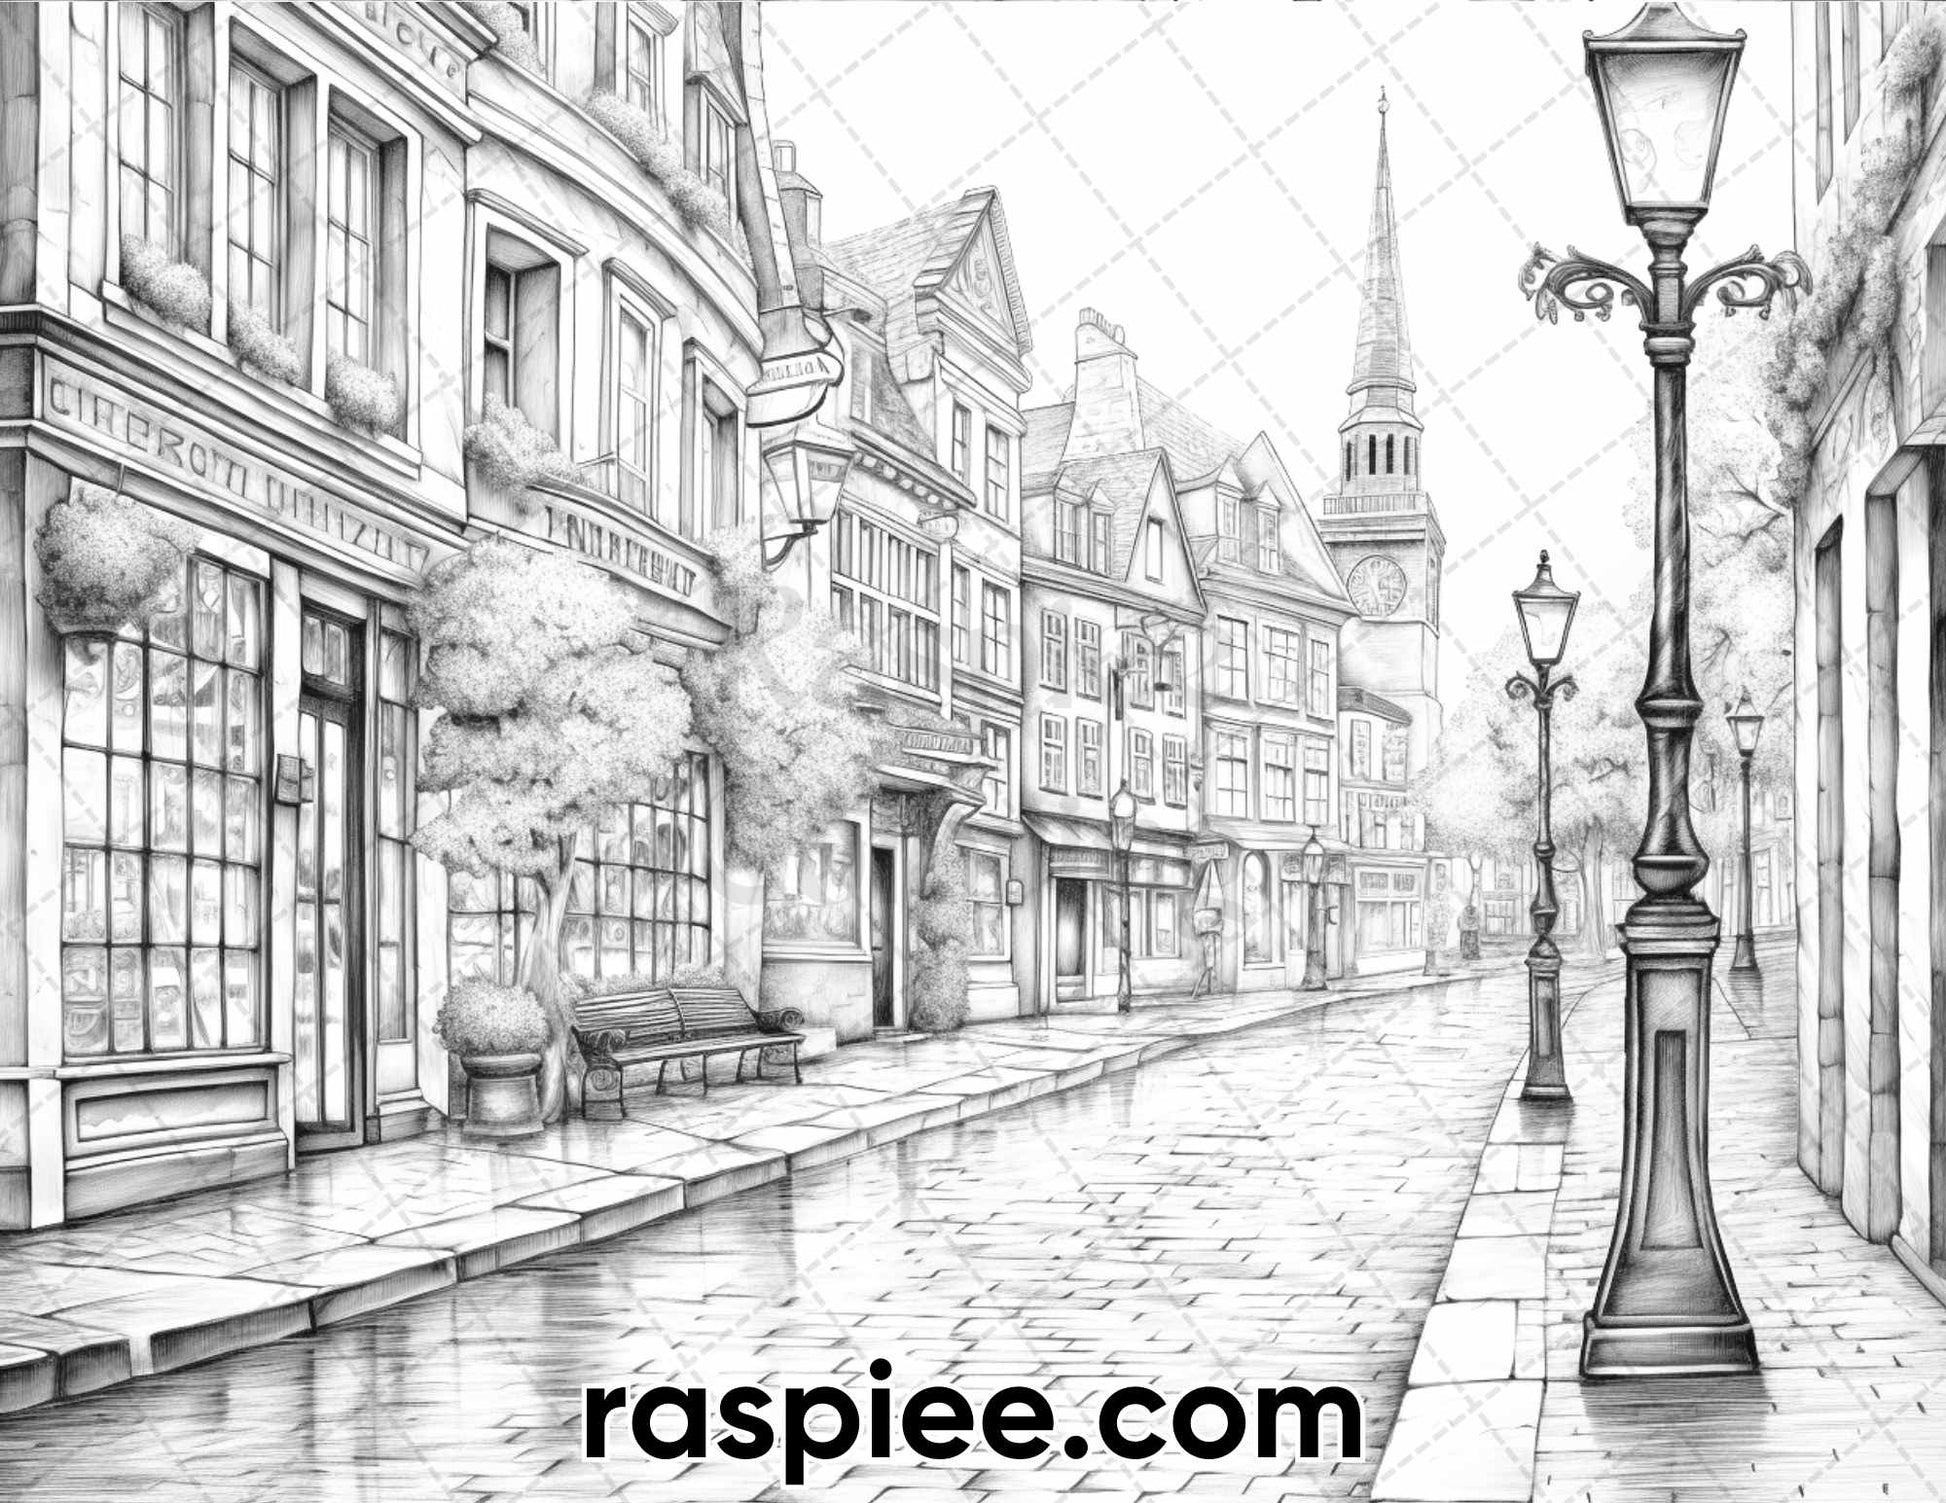 adult coloring pages, adult coloring sheets, adult coloring book pdf, adult coloring book printable, spring coloring pages for adults, spring coloring book, landscape coloring pages for adults, rainy day coloring pages